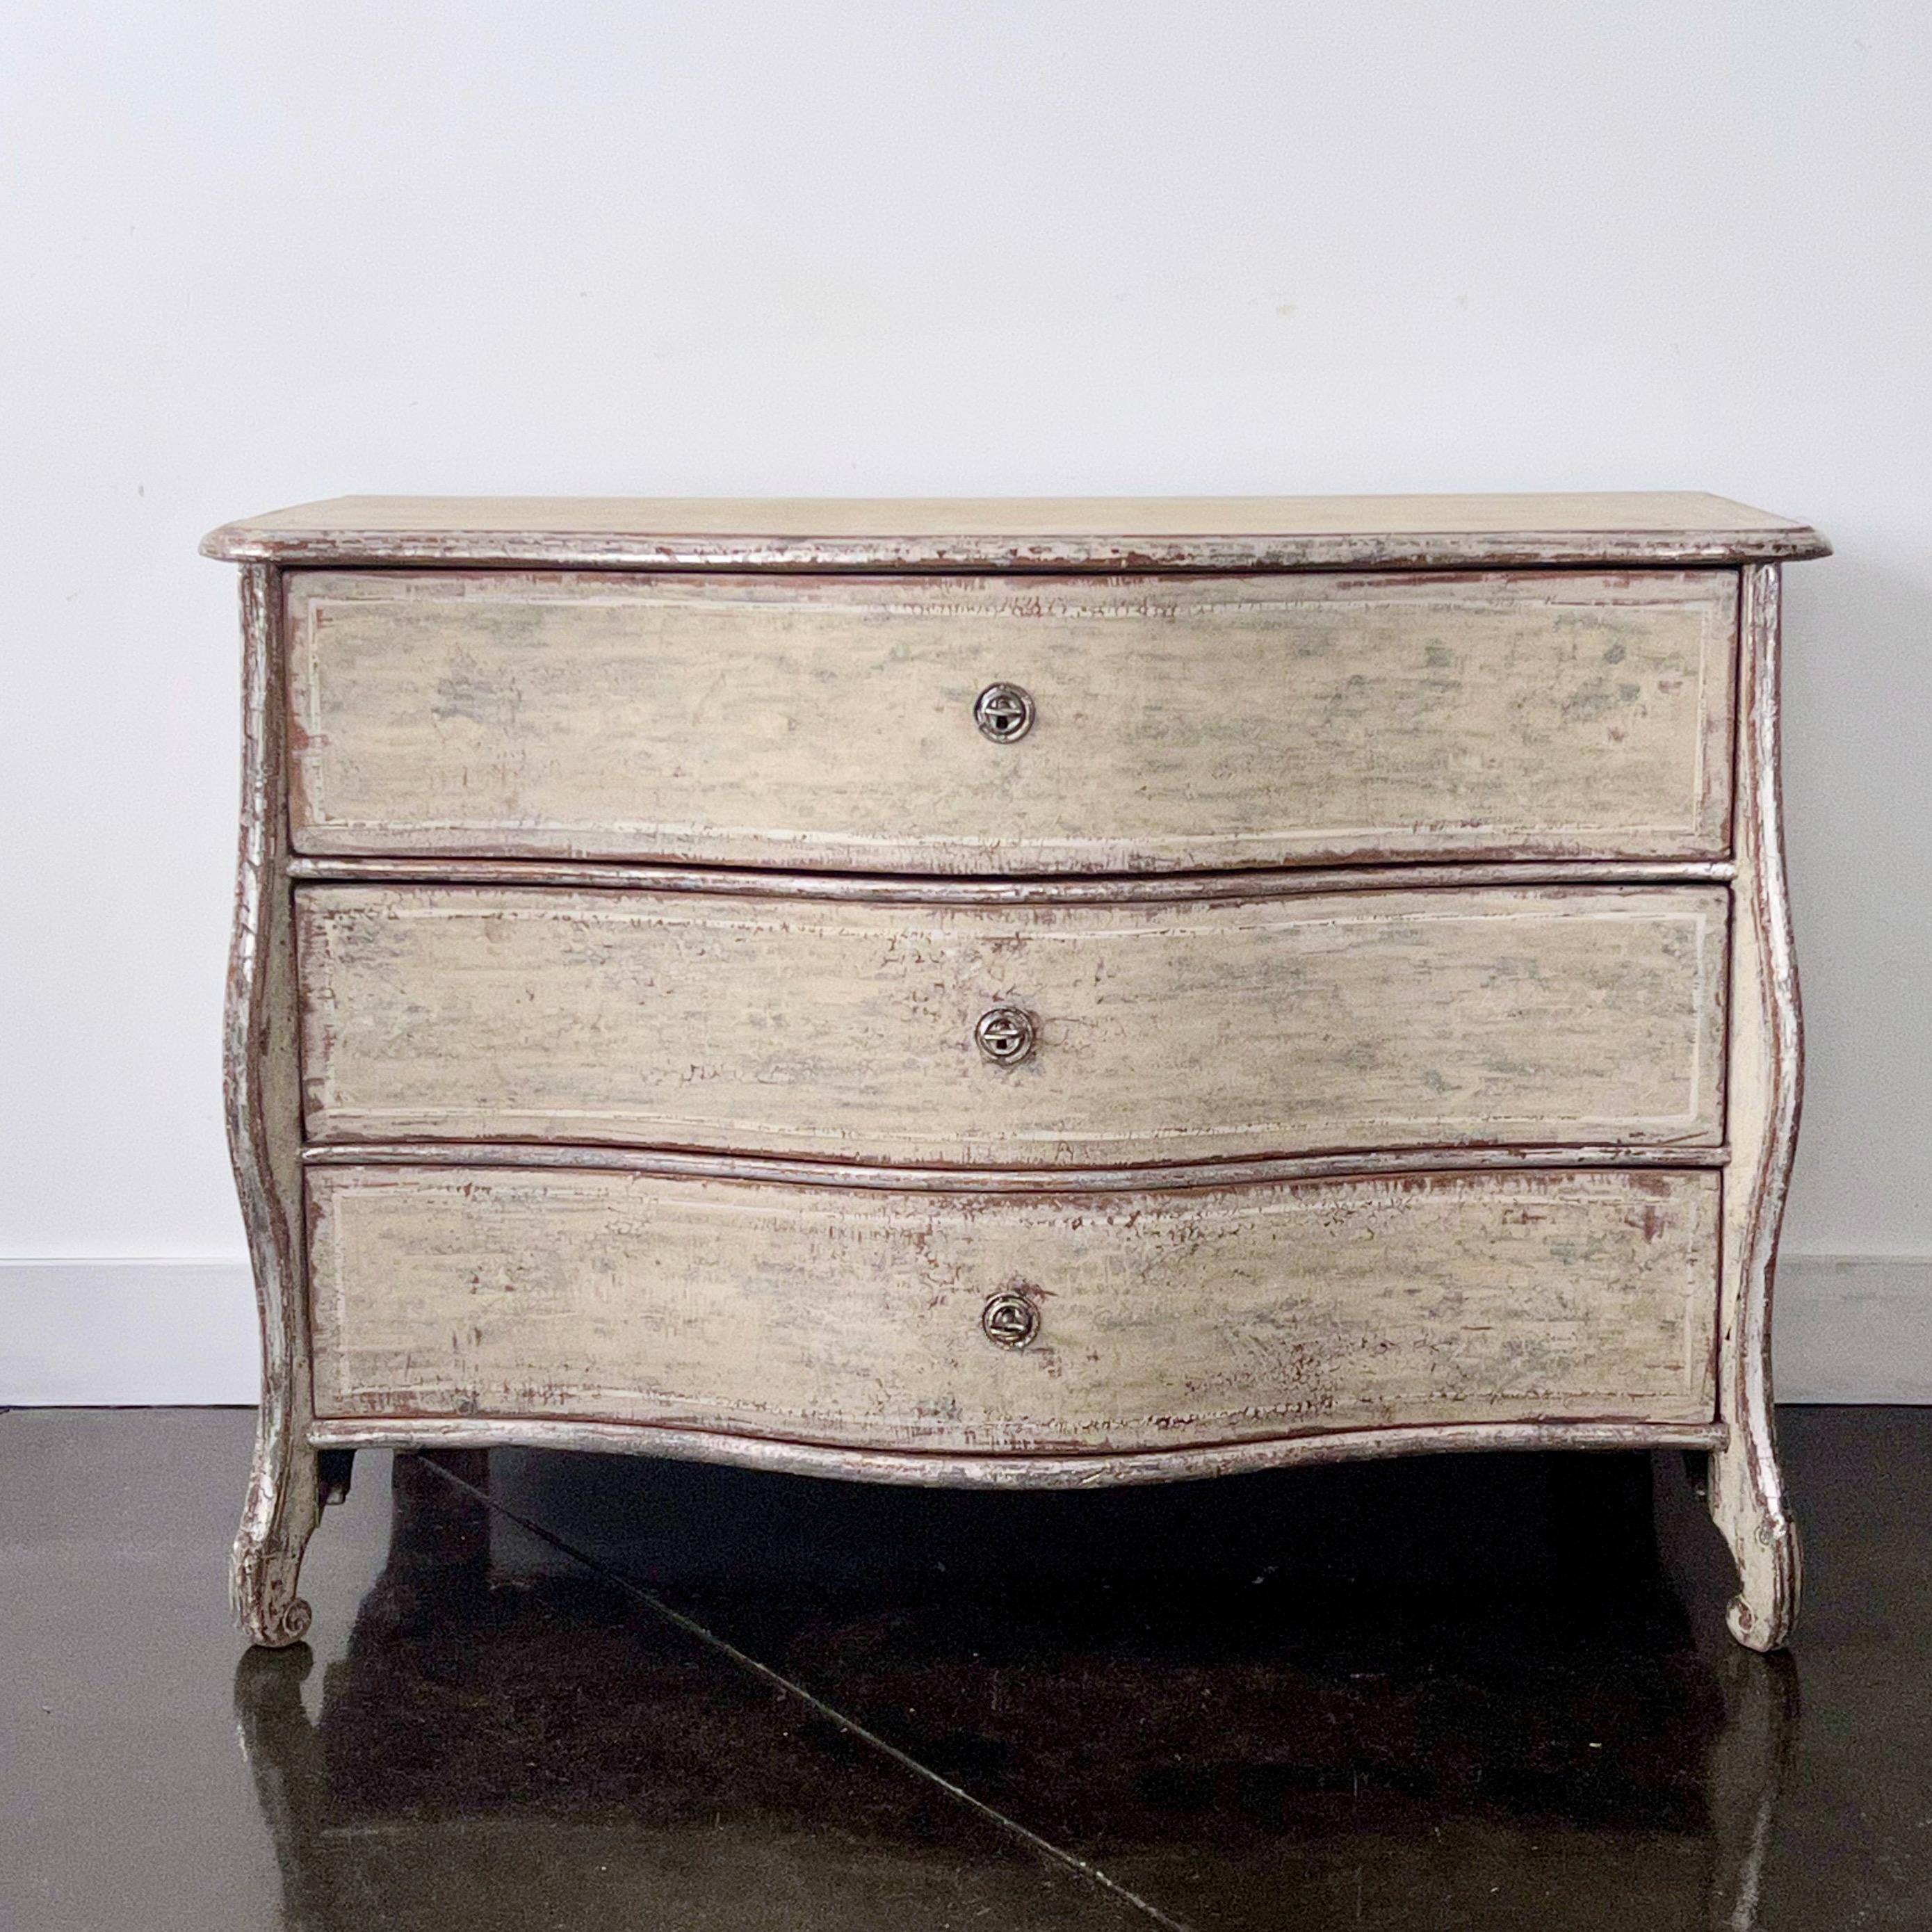 18th Century chest of drawers from late Baroque period in richly carved curvaceous serpentine drawer fronts, shaped top and unusual skillfully carved feet in super later patina finish.
Germany 18th Century.

More than ever, we selected the best,